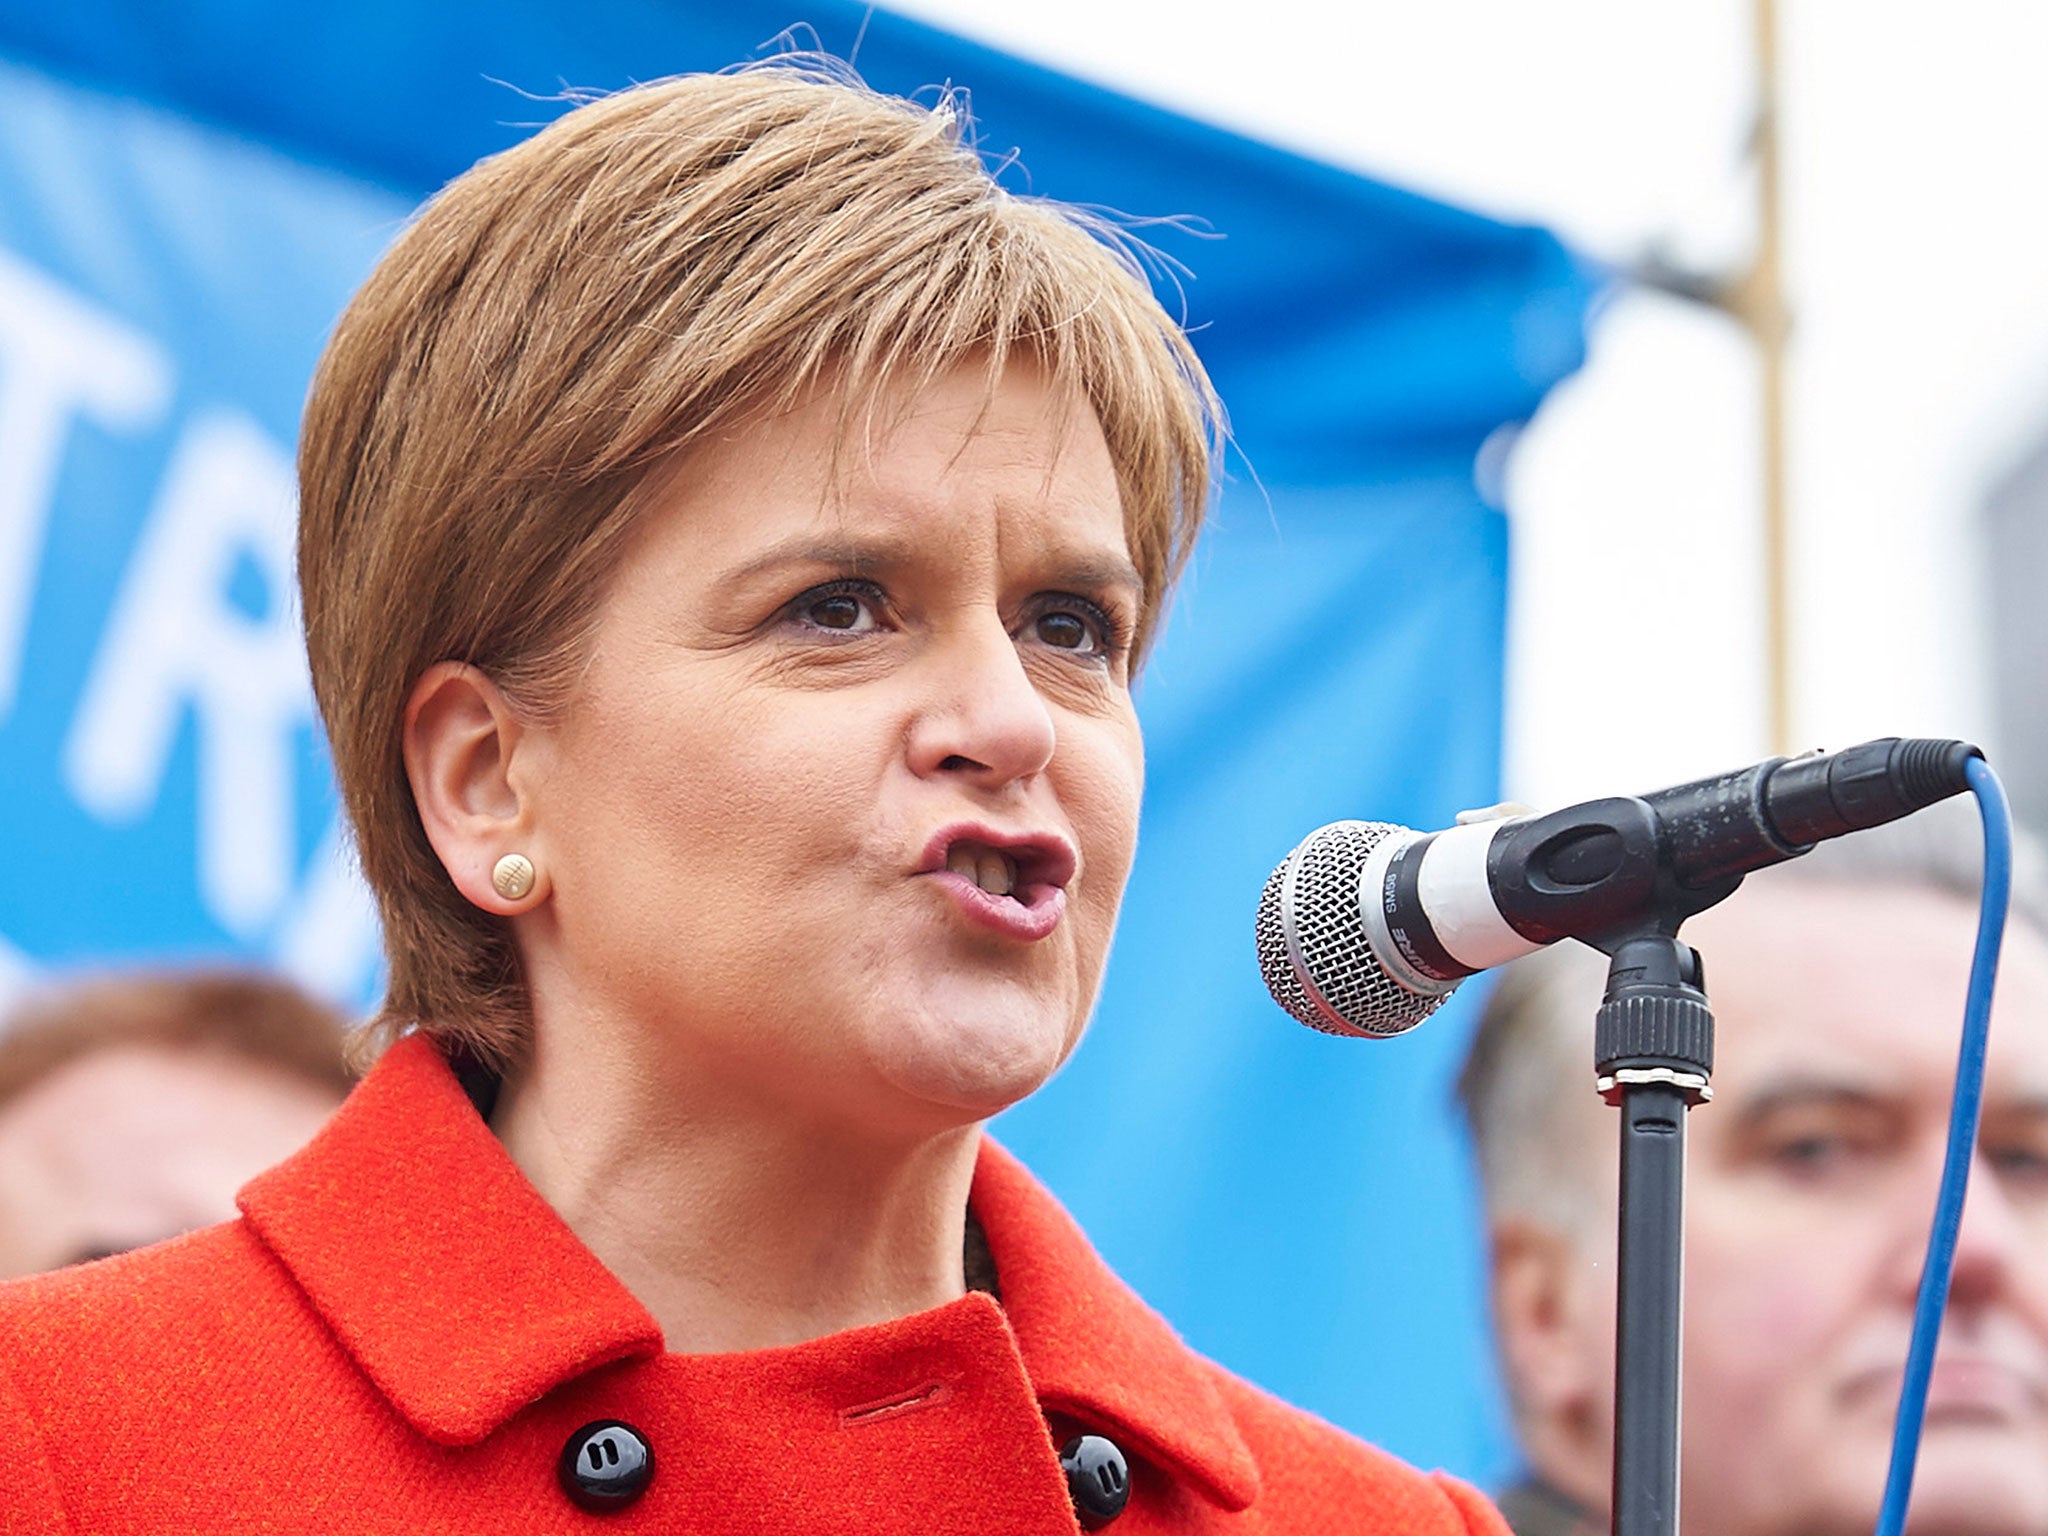 Scotland's First Minister, Nicola Sturgeon, says that leaving the European Union would make it harder for Britain to help the world’s most vulnerable people